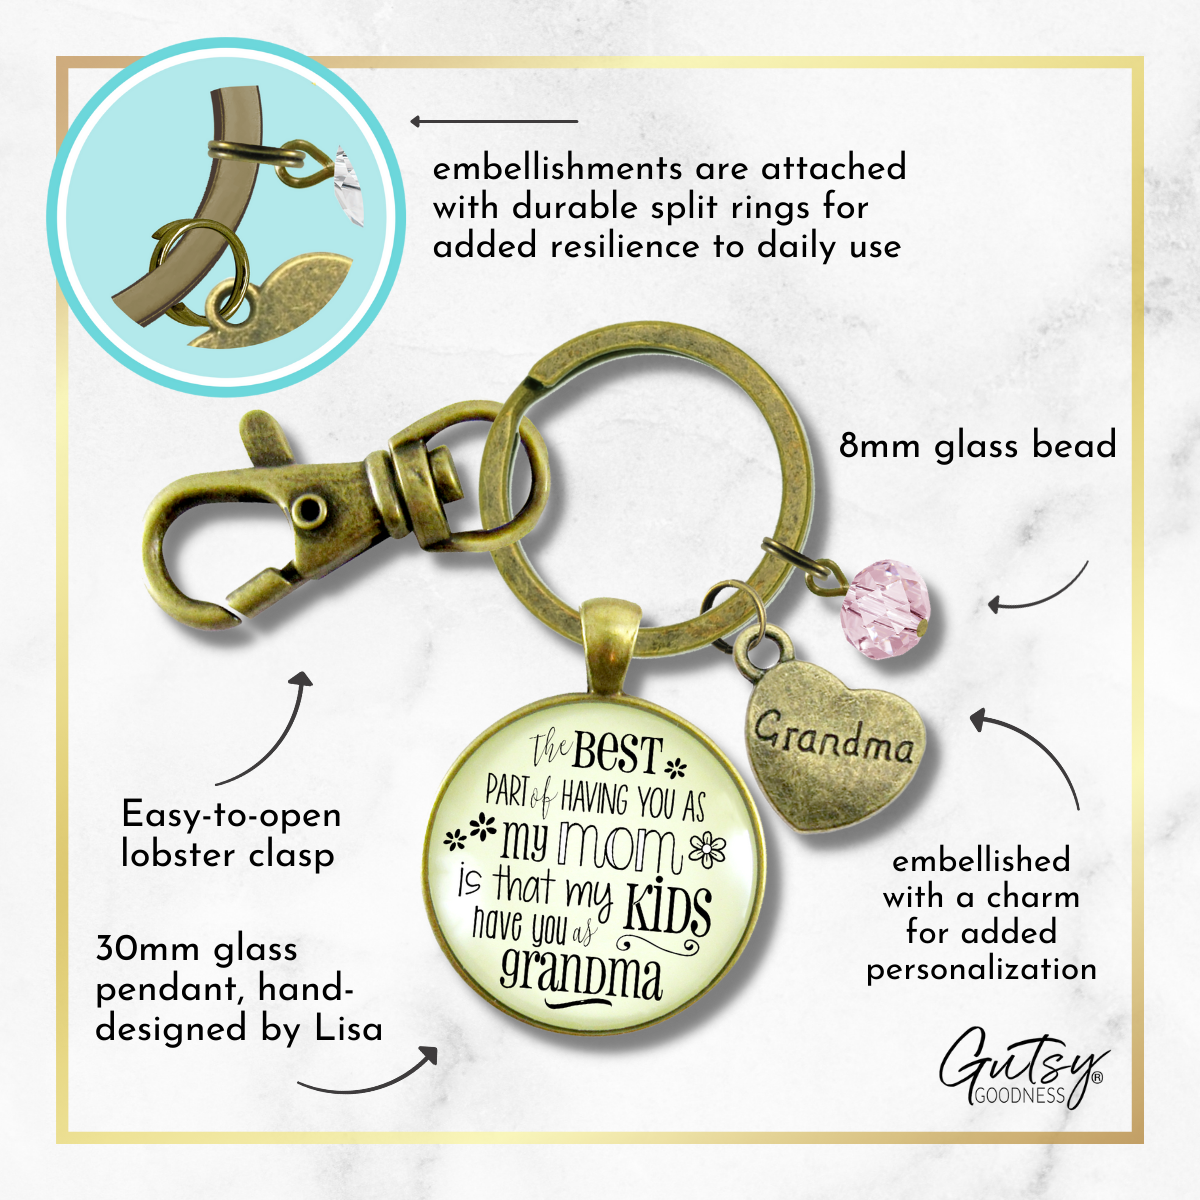 Grandmother Keychain Best Part You As Mom My Kids Grandma Jewelry Gift From Daughter - Gutsy Goodness Handmade Jewelry;Grandmother Keychain Best Part You As Mom My Kids Grandma Jewelry Gift From Daughter - Gutsy Goodness Handmade Jewelry Gifts